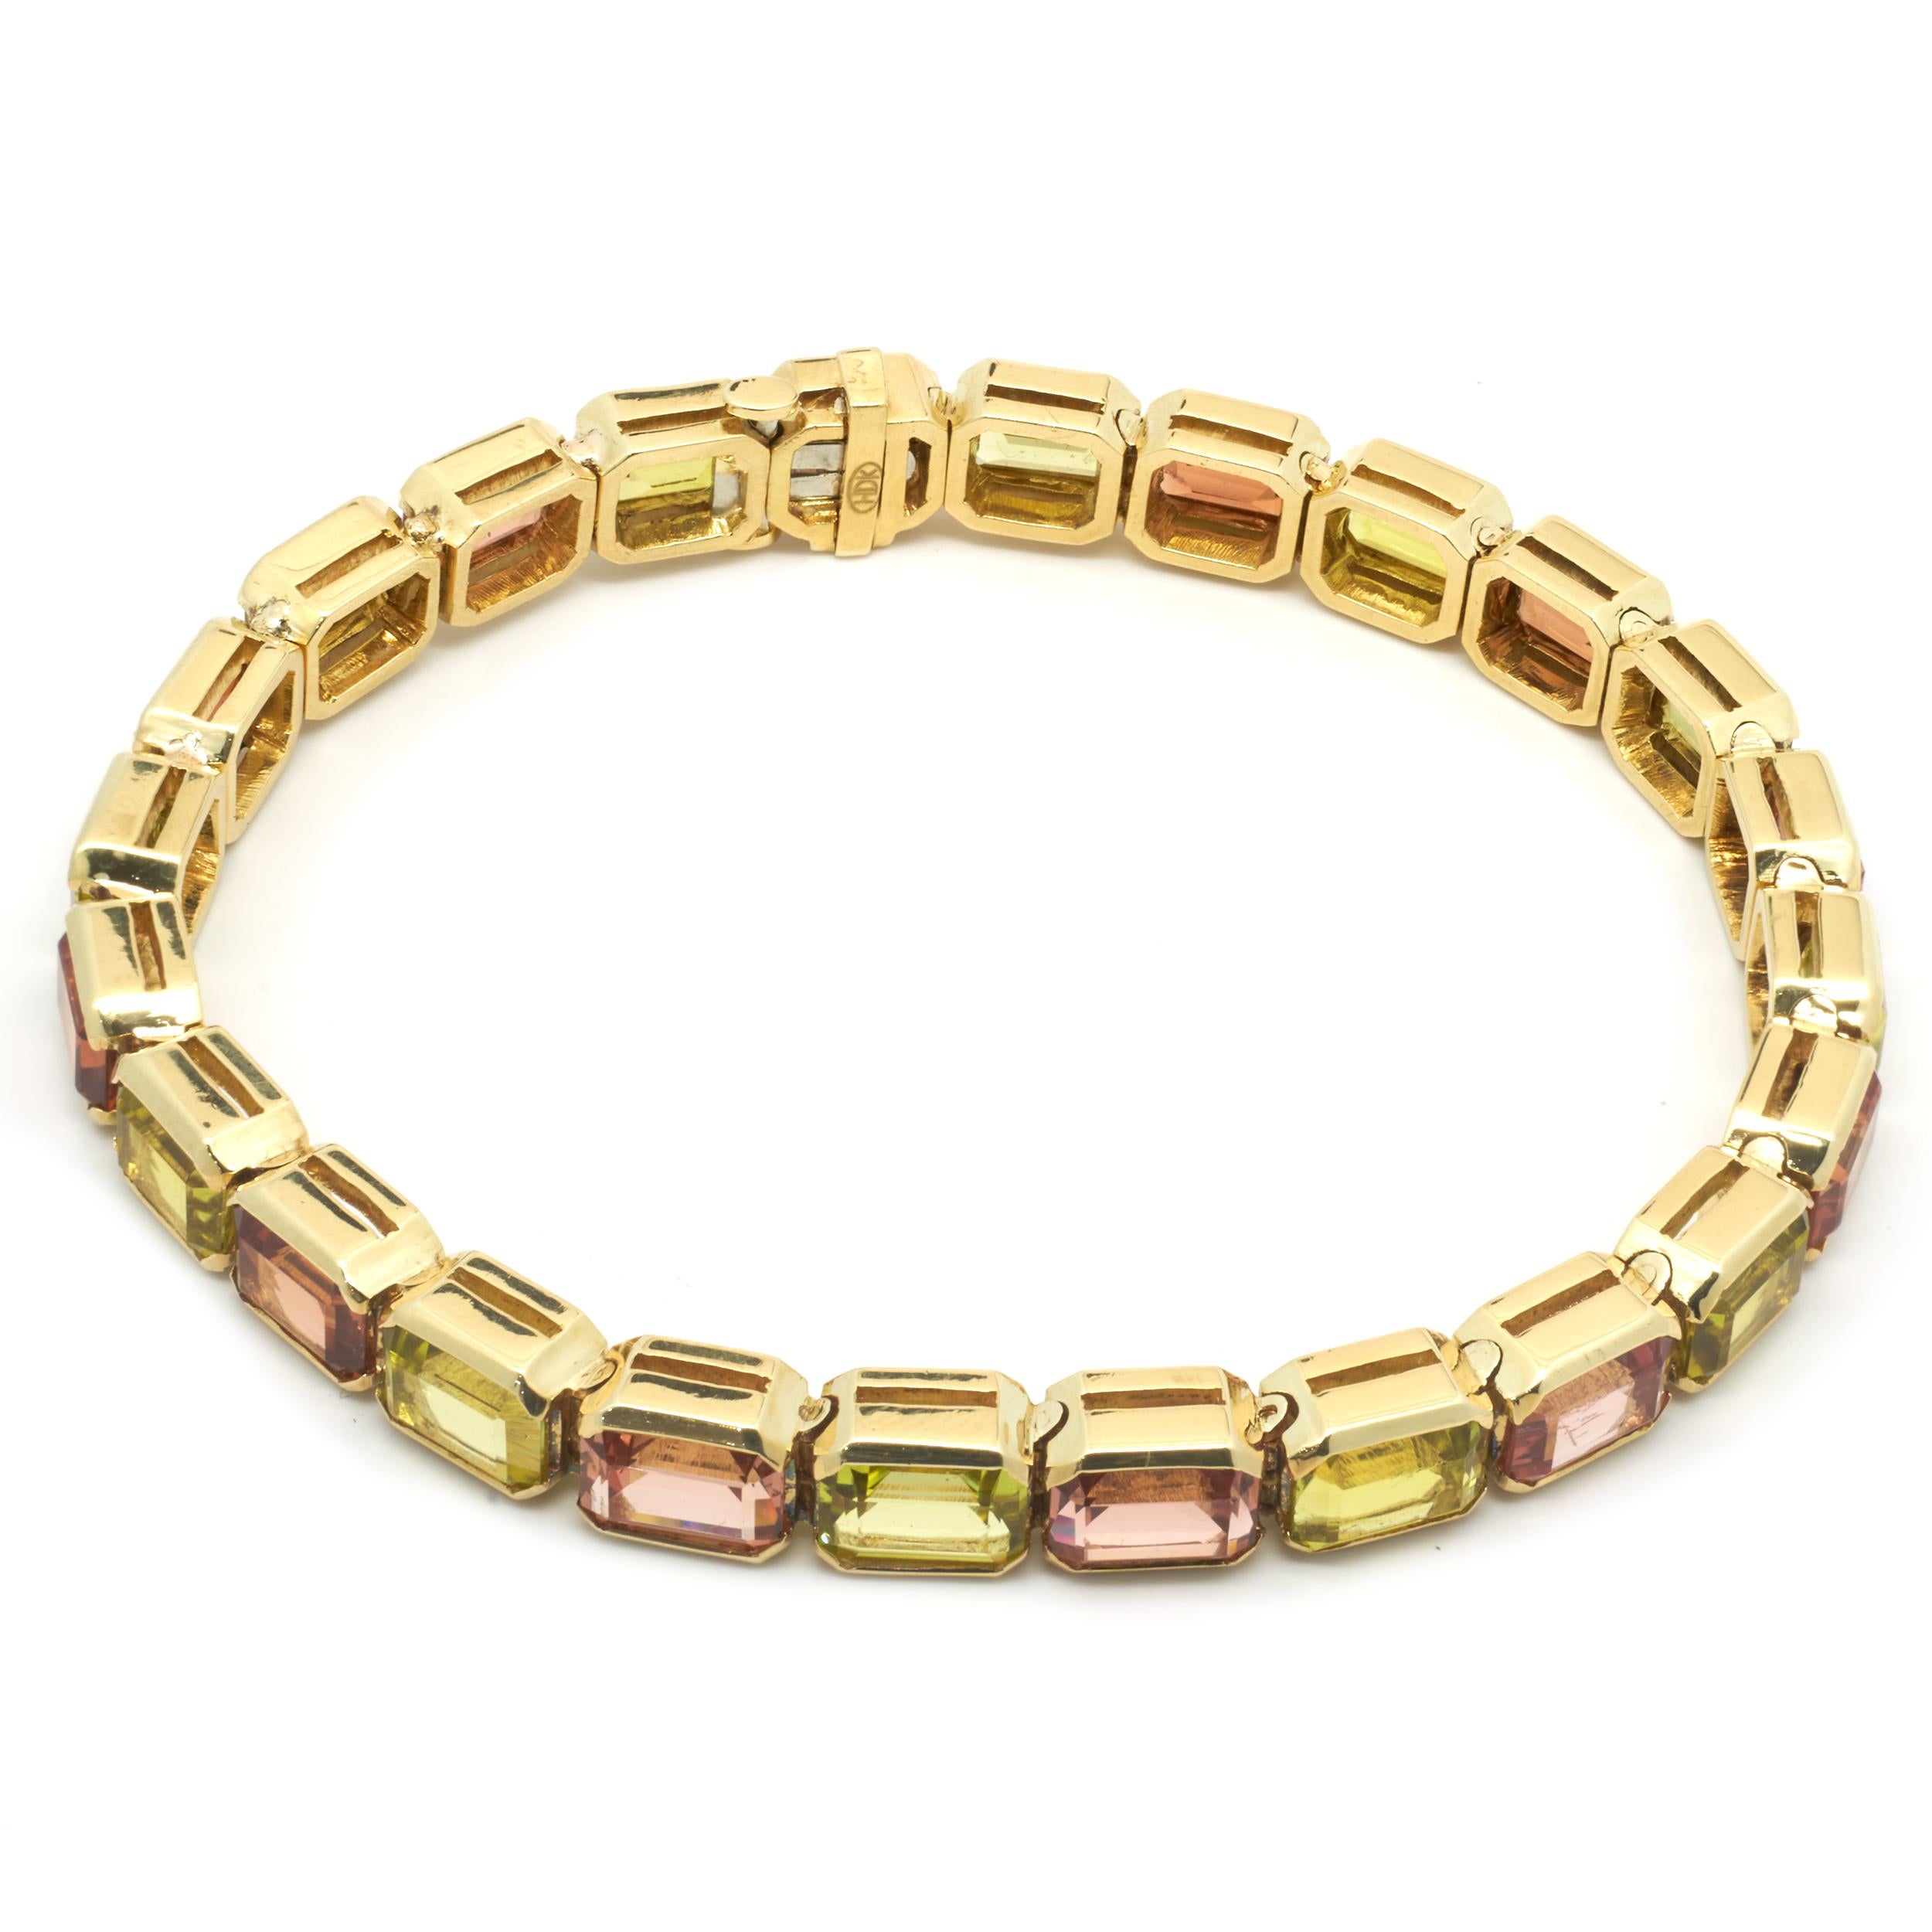 Designer: Hans D. Krieger
Material: 18K yellow gold
Sapphire: 24 emerald cut = 29.22cttw
Color: Natural Peach / Green Apple
Clarity: AAA+
Weight: 30.98 grams
Dimensions: bracelet measures 7.25-inches in length
